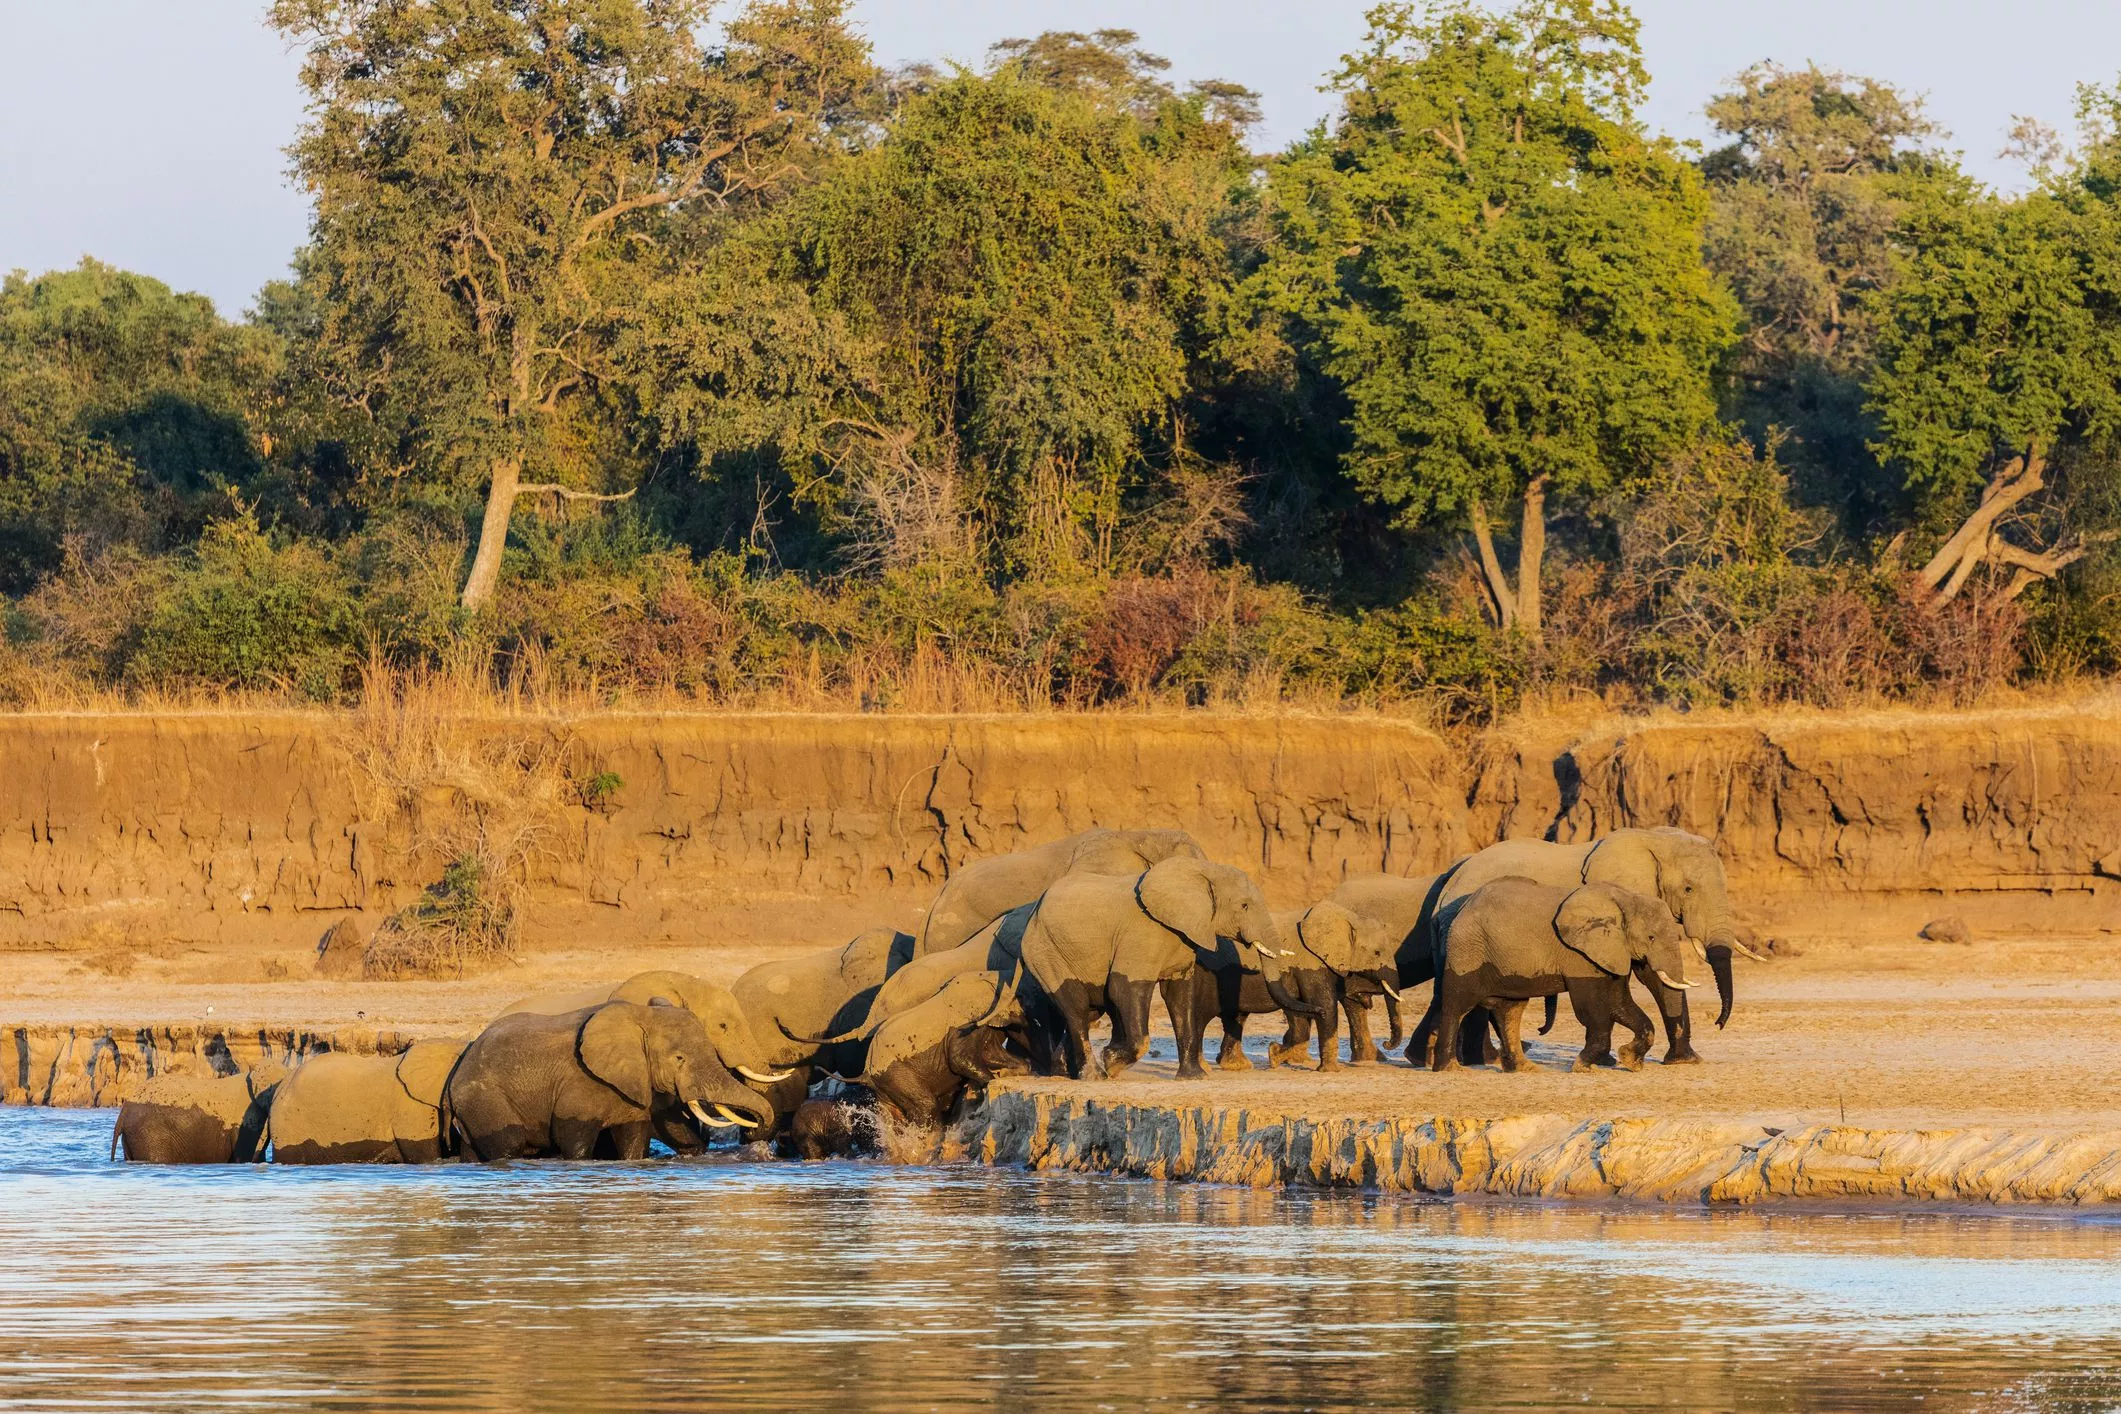 South Luangwa National Park in Zambia, Africa | Parks,Safari,Trekking & Hiking - Rated 0.7